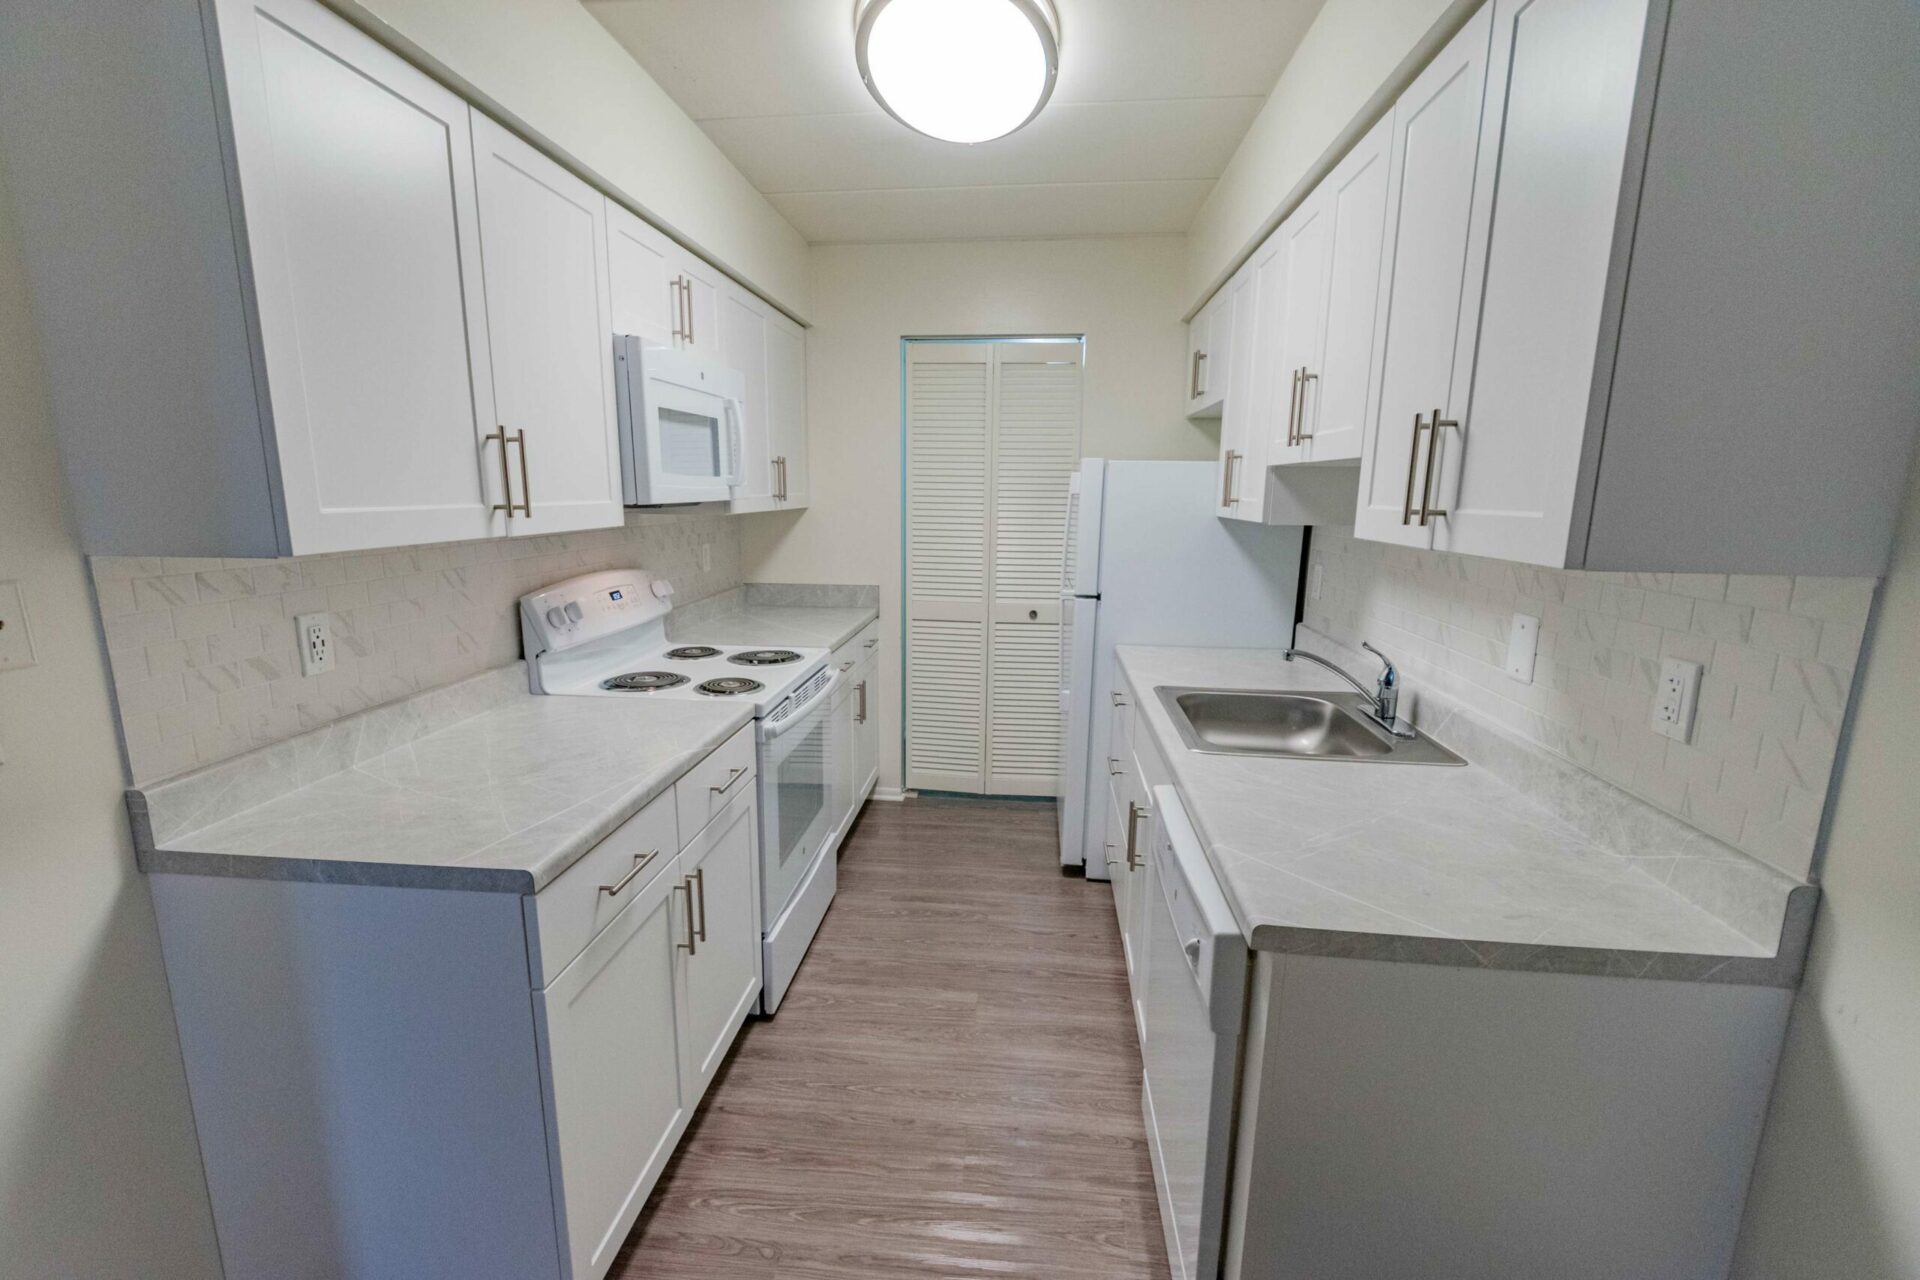 Galley Kitchen with white appliances at Whiteland West Apartments